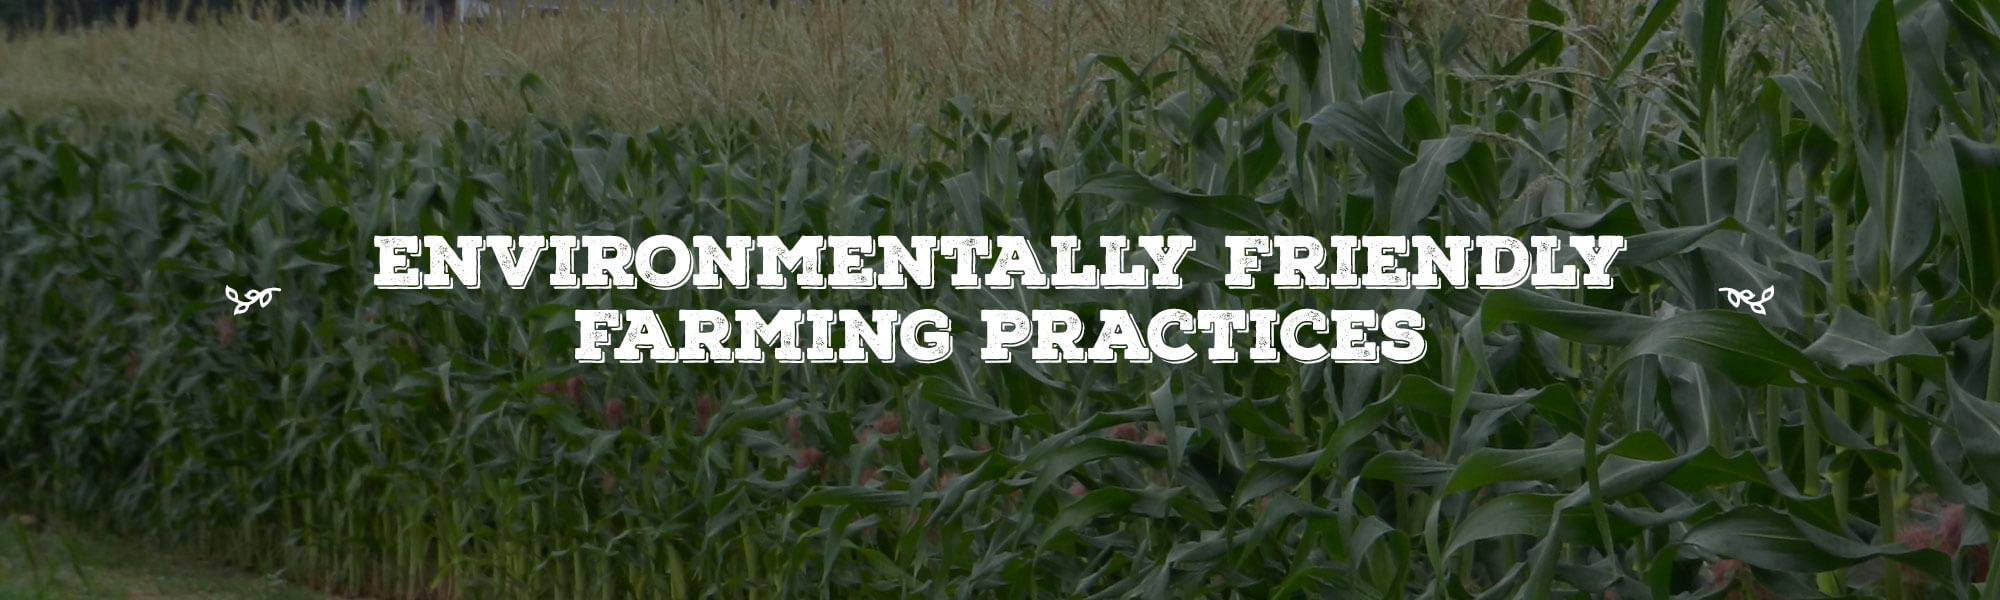 Environmentally Friendly Farming Practices overlay on image Corn Field